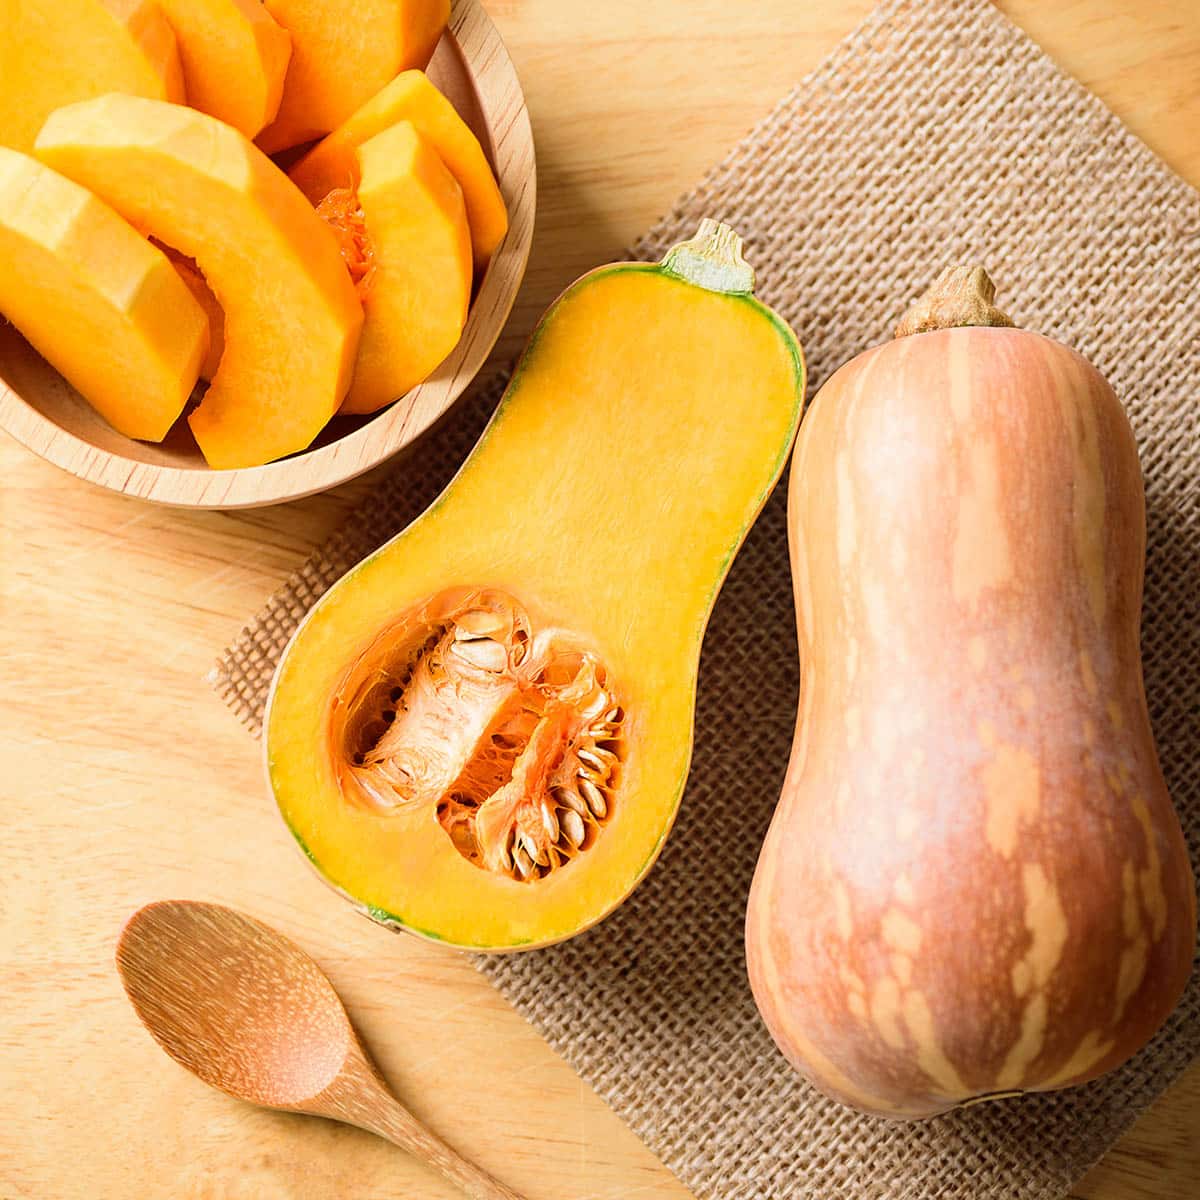 Raw butternut squash - whole, halved, and sliced,